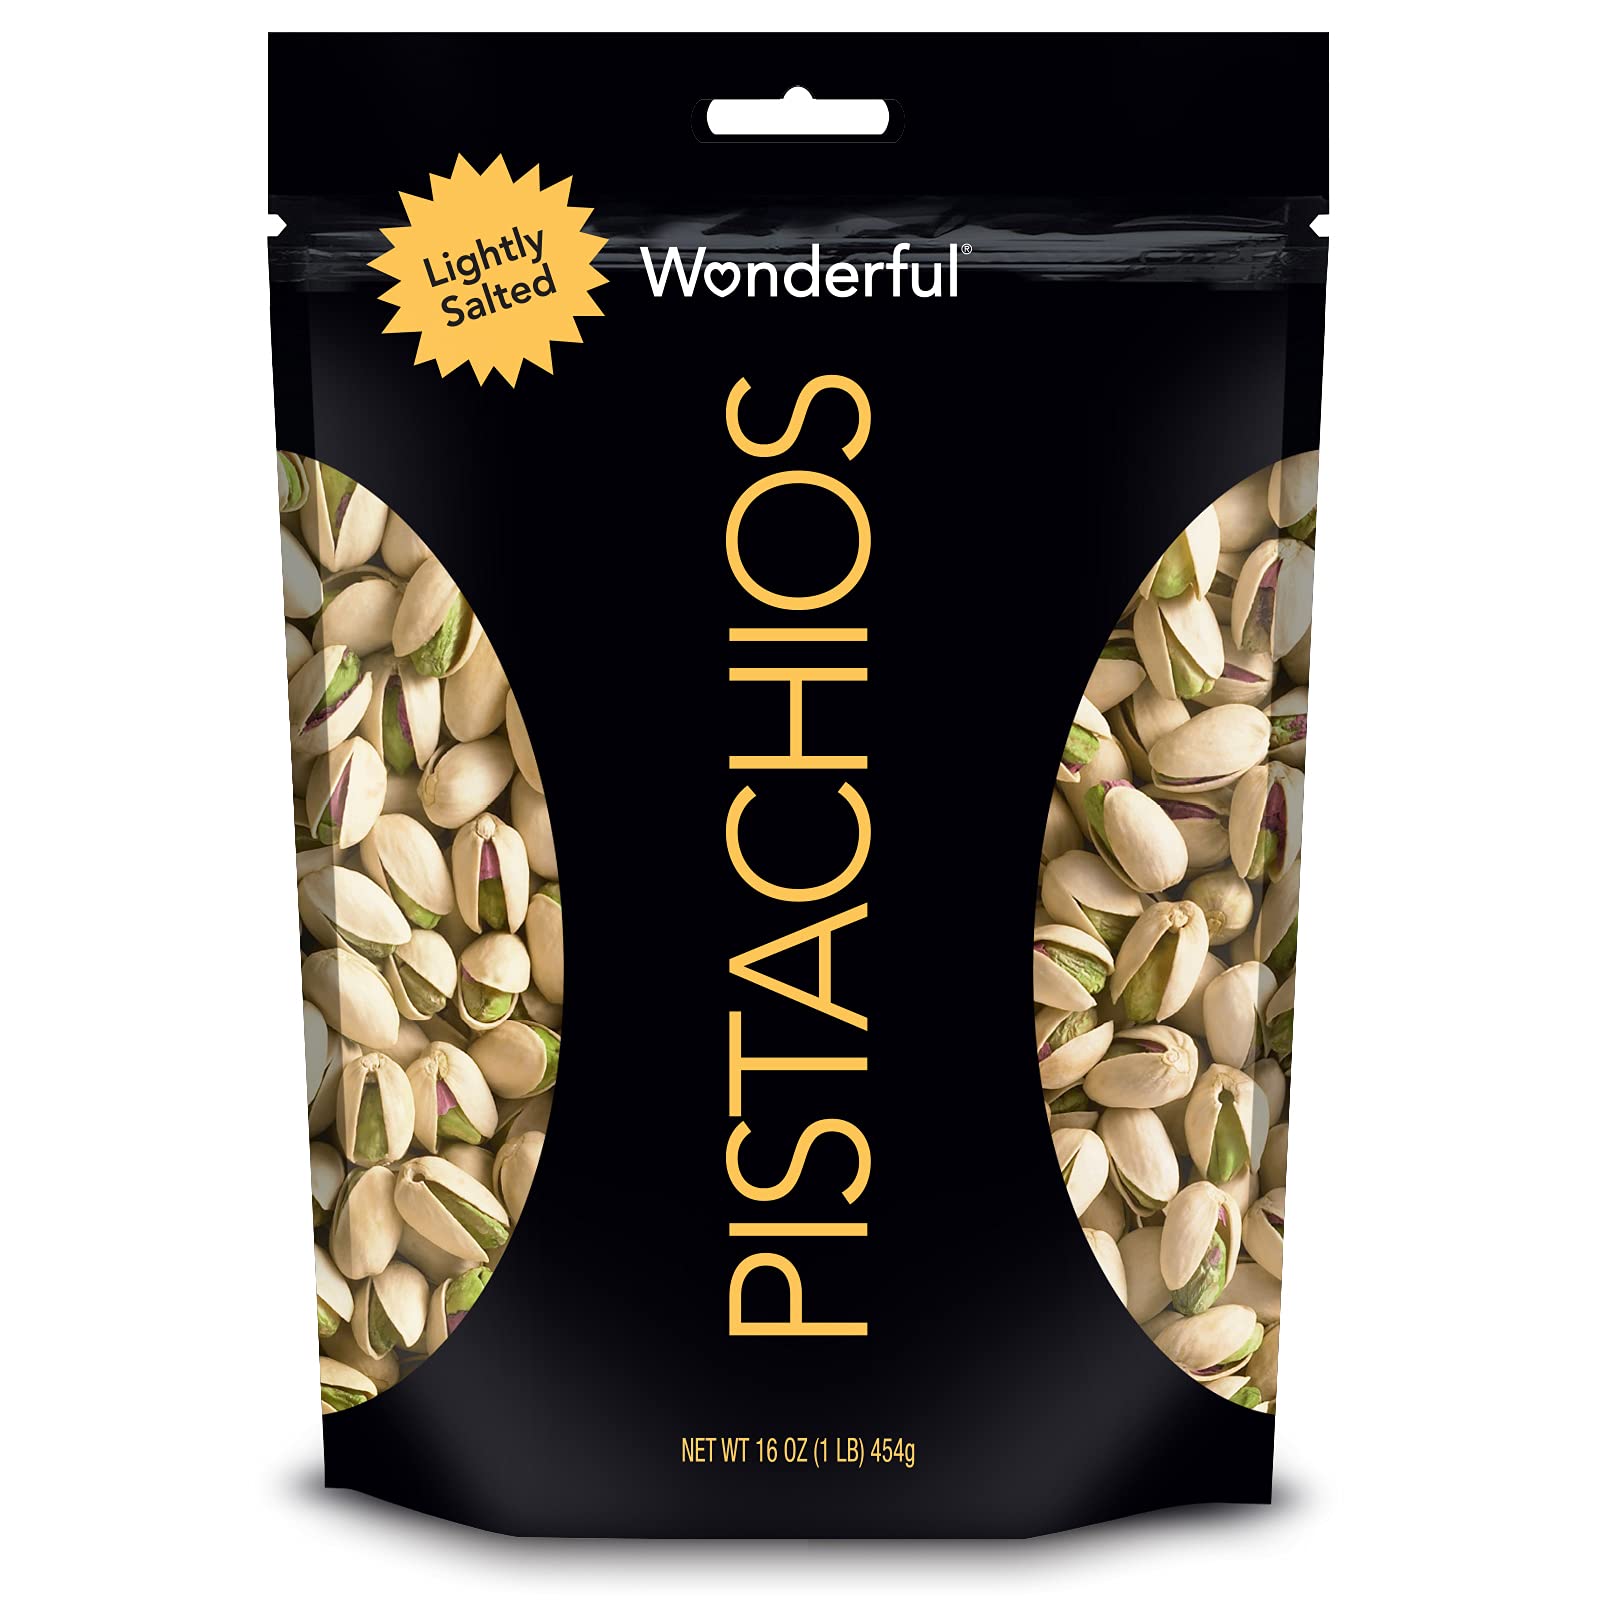 Wonderful Pistachios Roasted &, Resealable Bag, Lightly salted, 16 Oz~$5.69 With S&S @ Amazon~Free Prime Shipping!